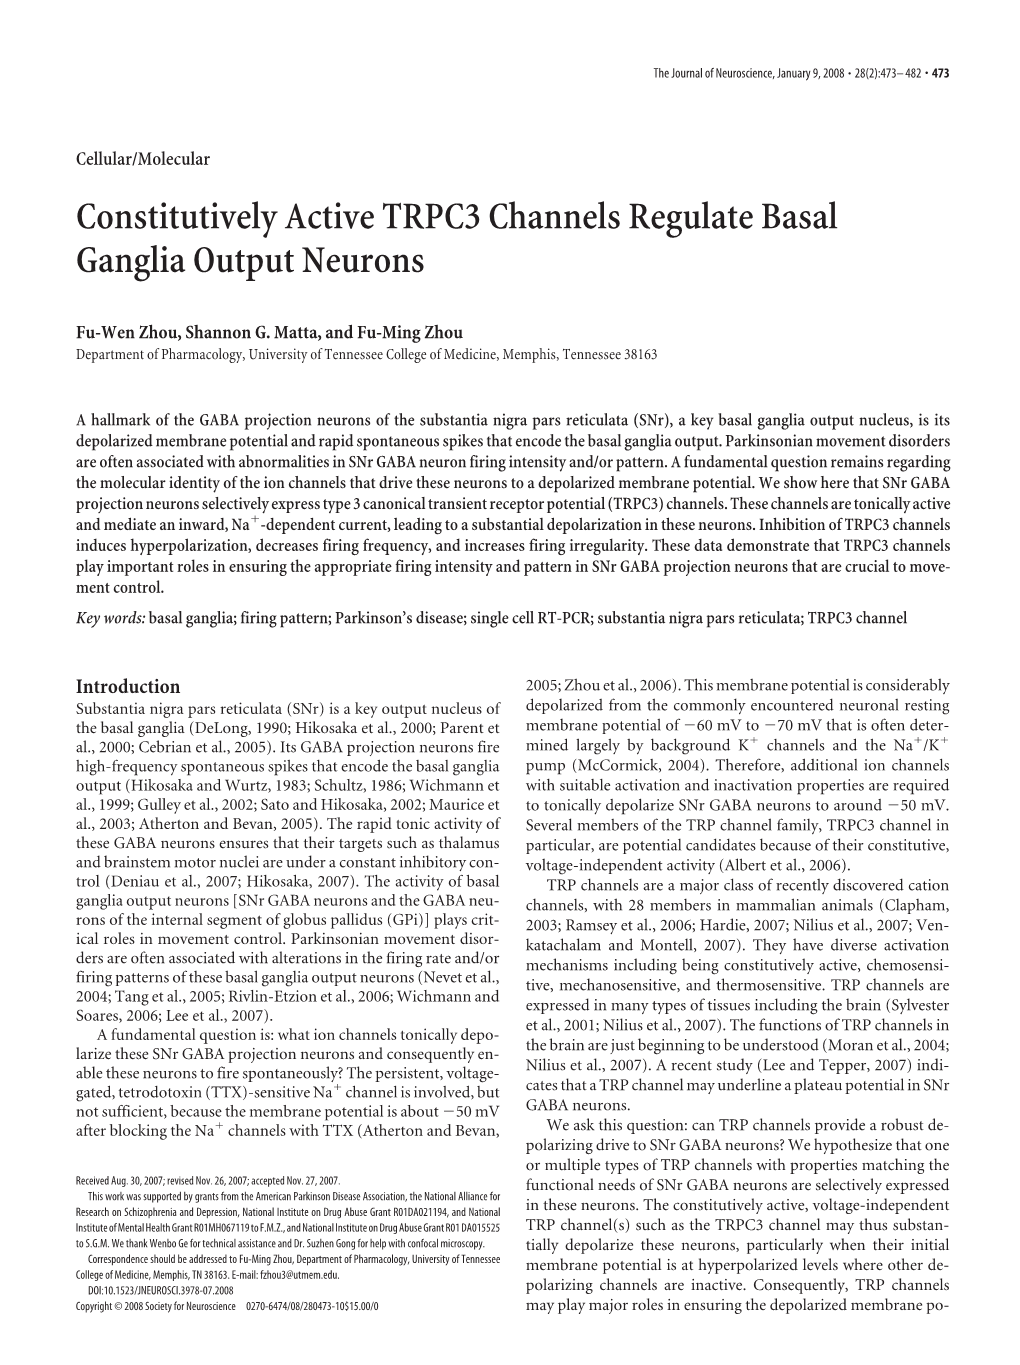 Constitutively Active TRPC3 Channels Regulate Basal Ganglia Output Neurons